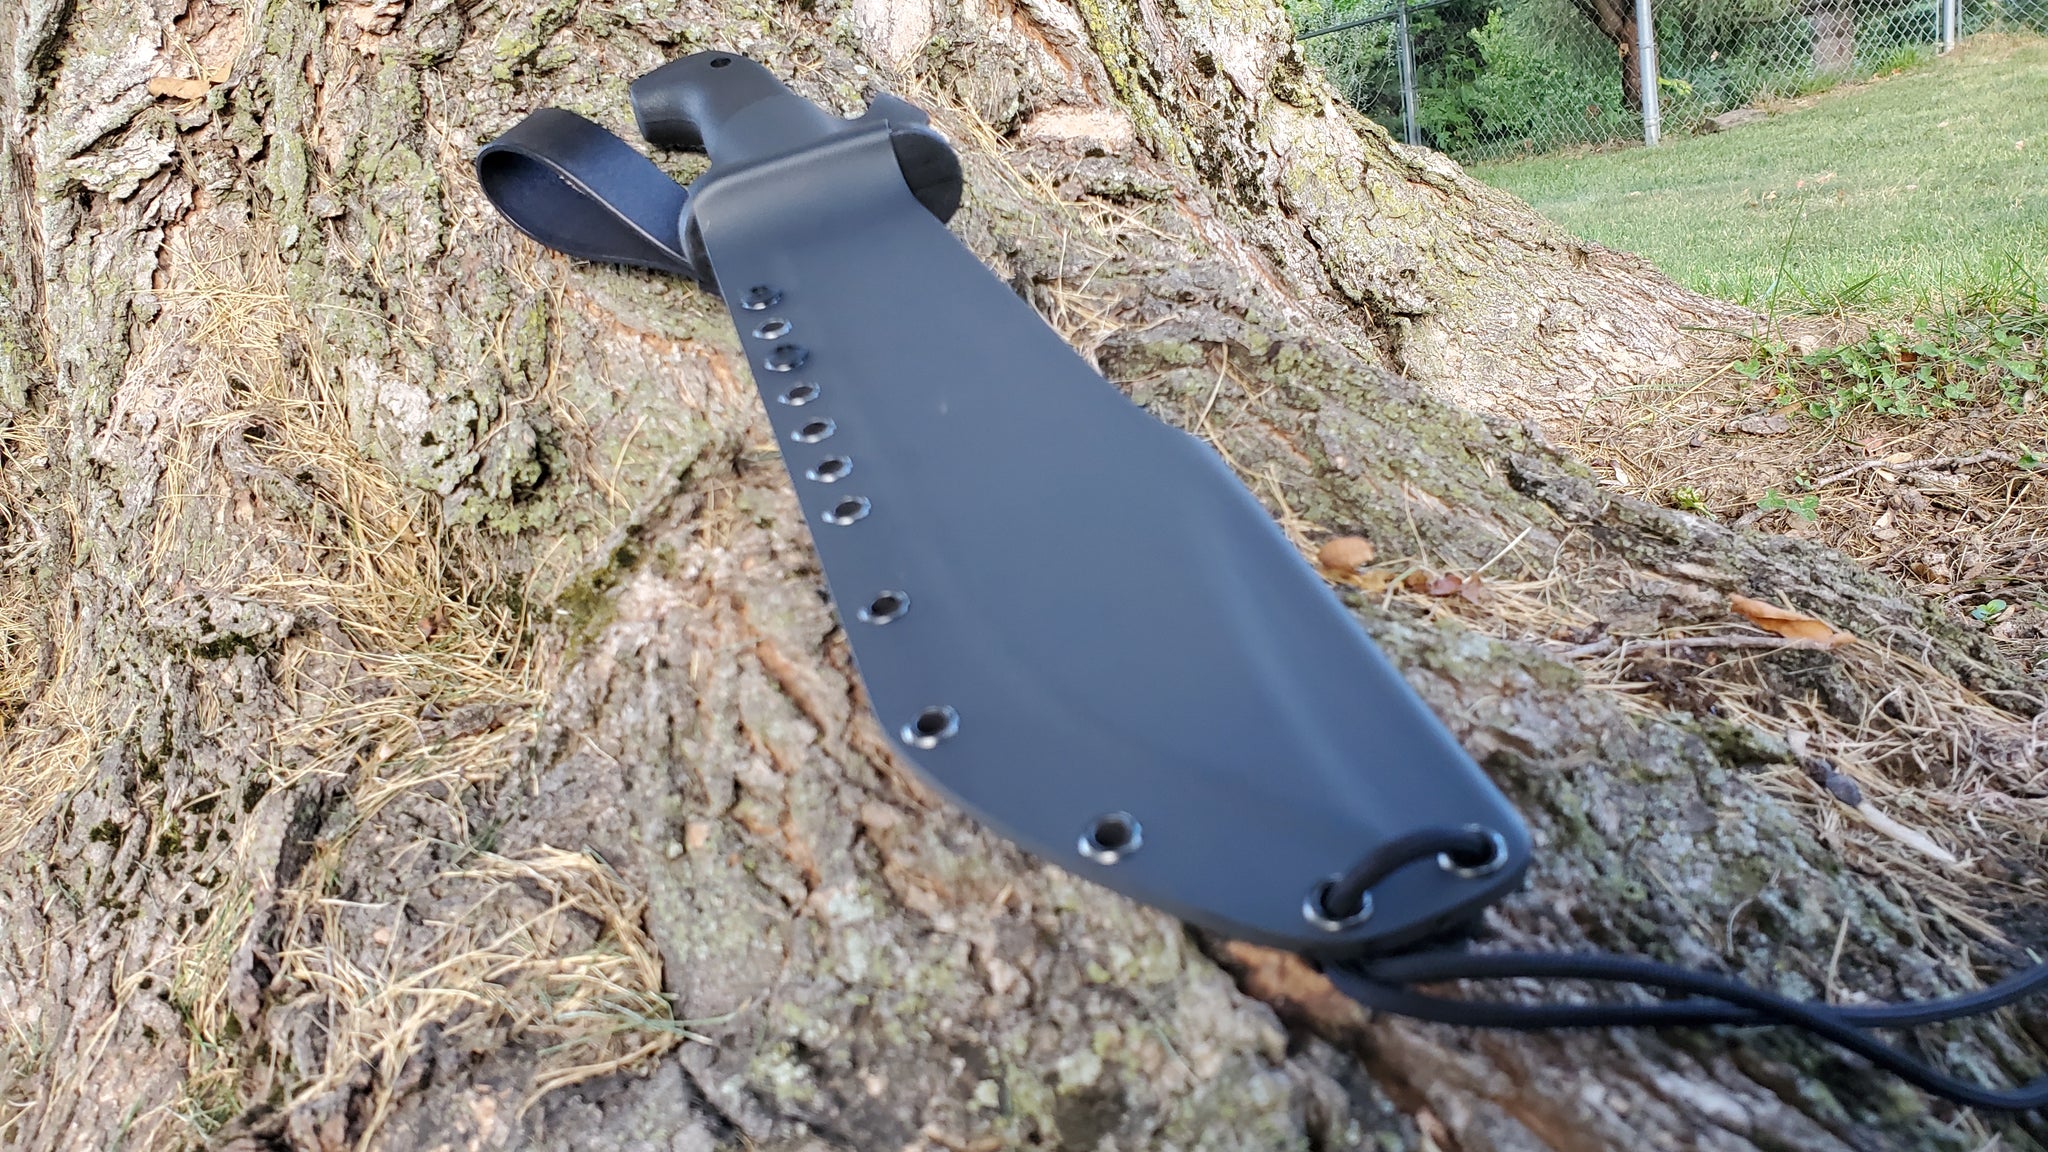 COLD STEEL "BLACK BEAR BOWIE" Kydex Taco Sheath with Leather Dangler